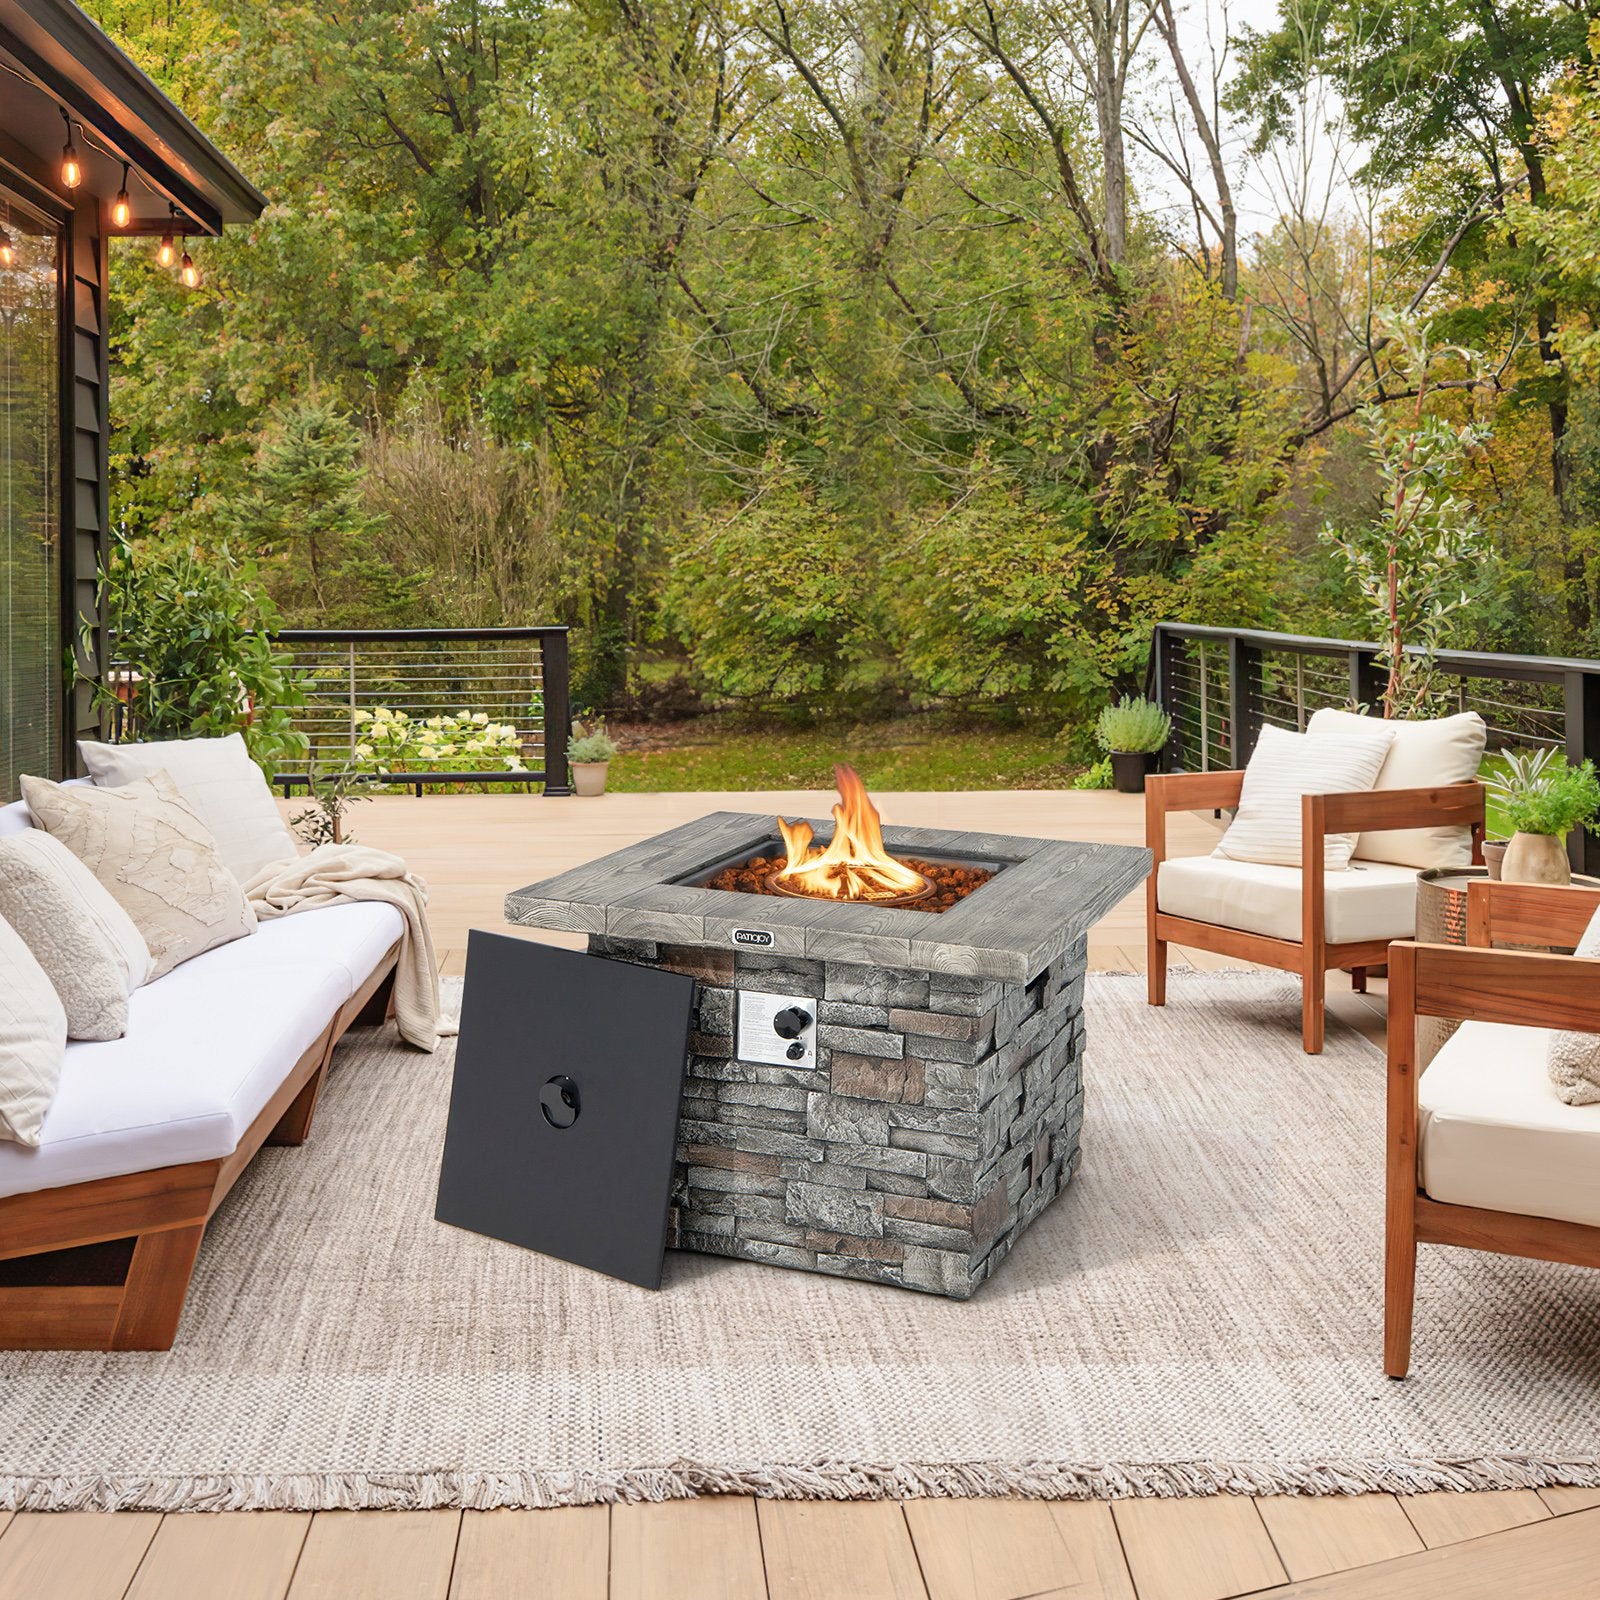 34.5 Inch Square Propane Gas Fire Pit Table with Lava Rock and PVC Cover, Gray at Gallery Canada